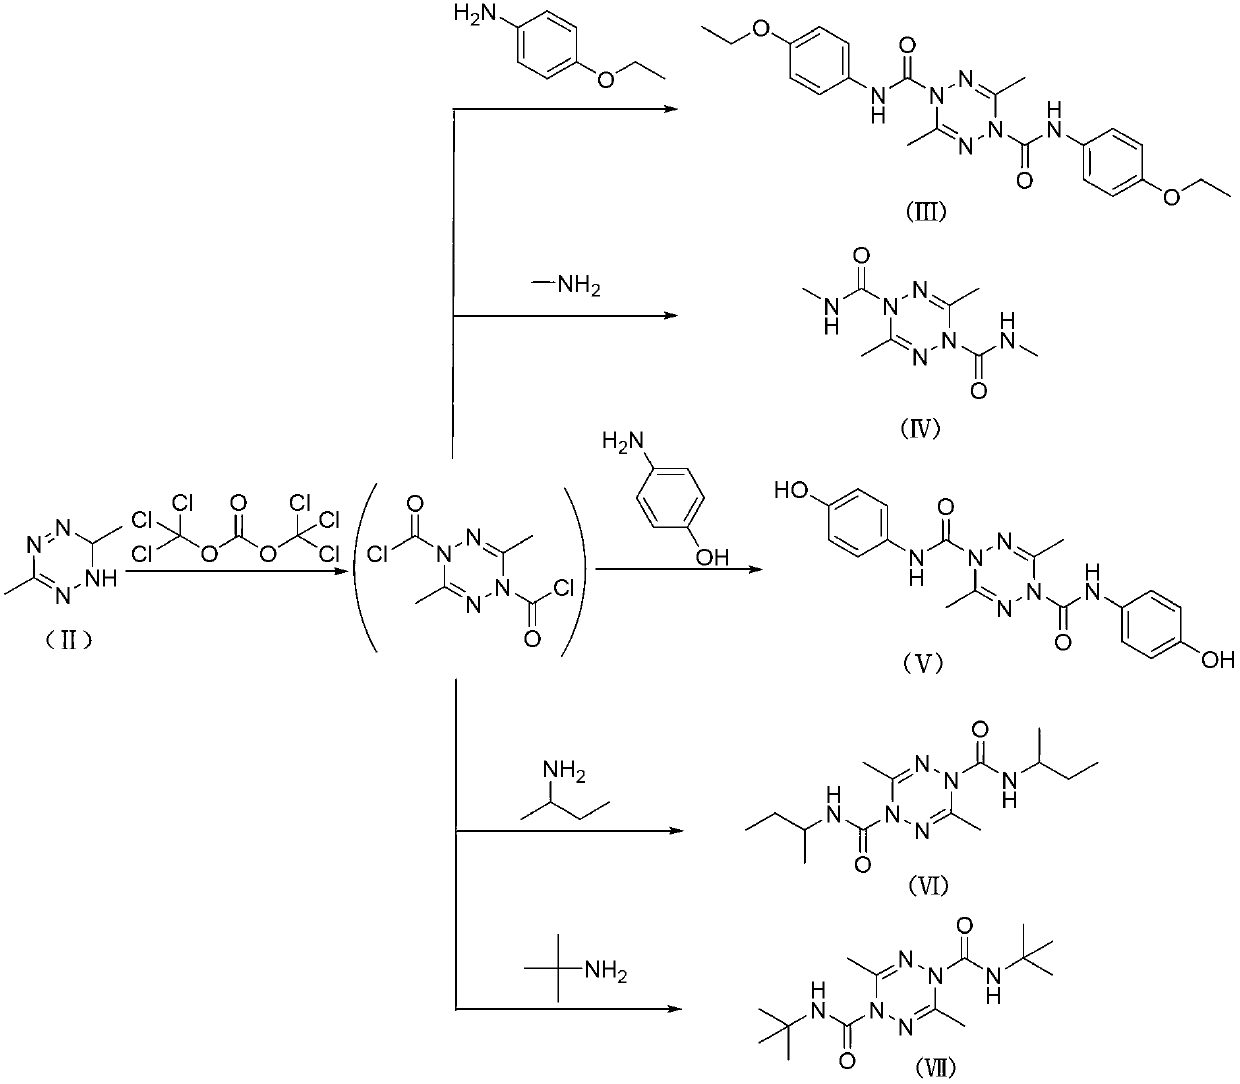 New compound m-hydroxyphenyl tetrazine dicarbonamide, preparation and application thereof